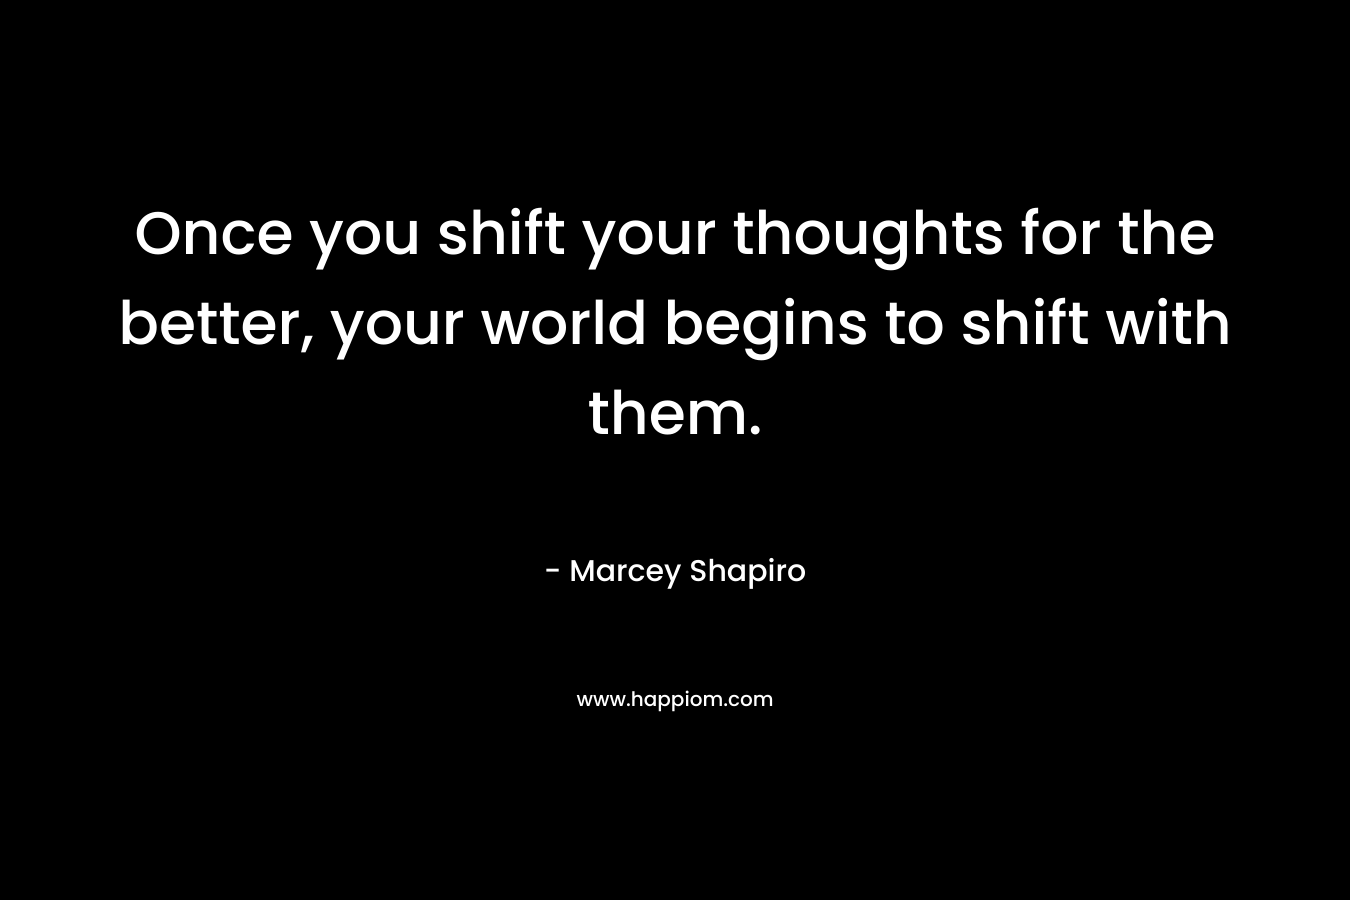 Once you shift your thoughts for the better, your world begins to shift with them. – Marcey Shapiro